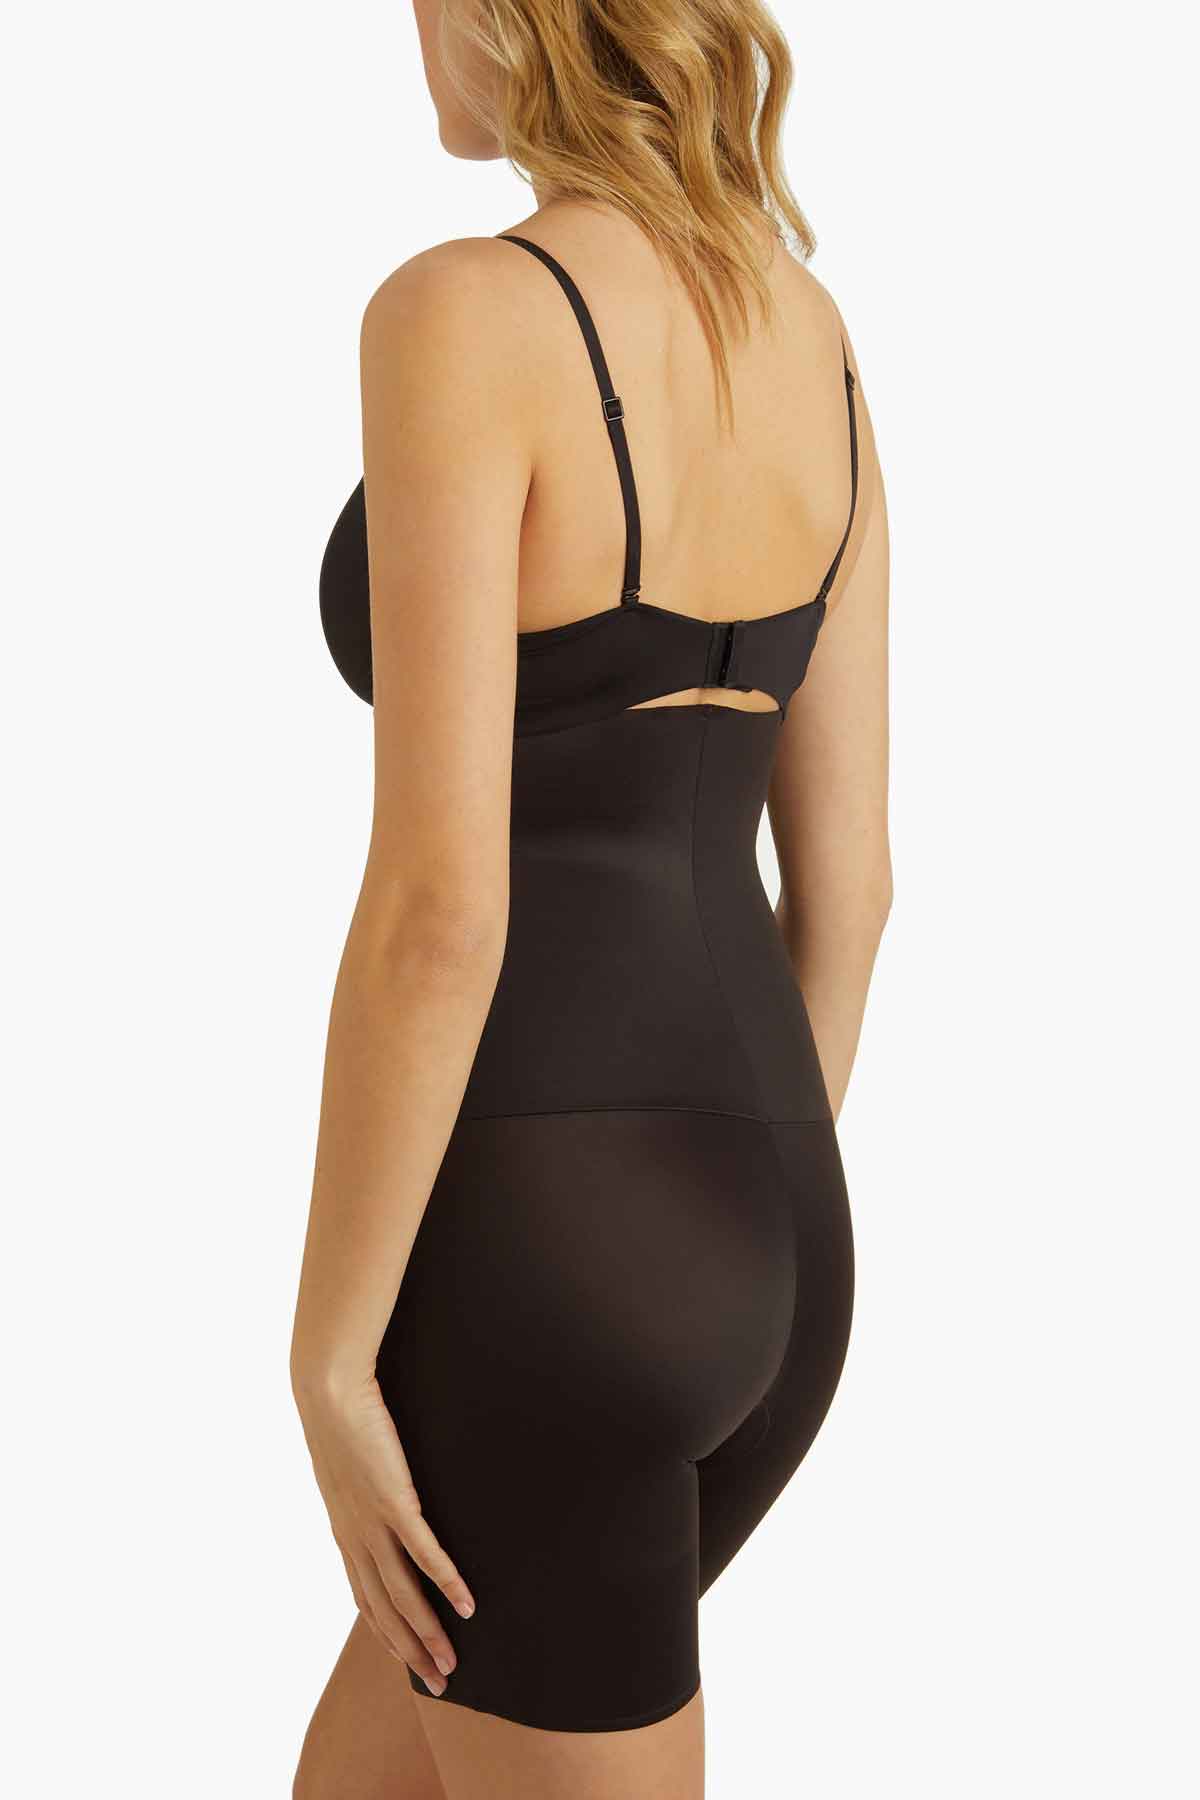 NZSALE  Miraclesuit Shapewear Comfy Curves Wireless Padded Cup Shaping  Bodysuit - Black